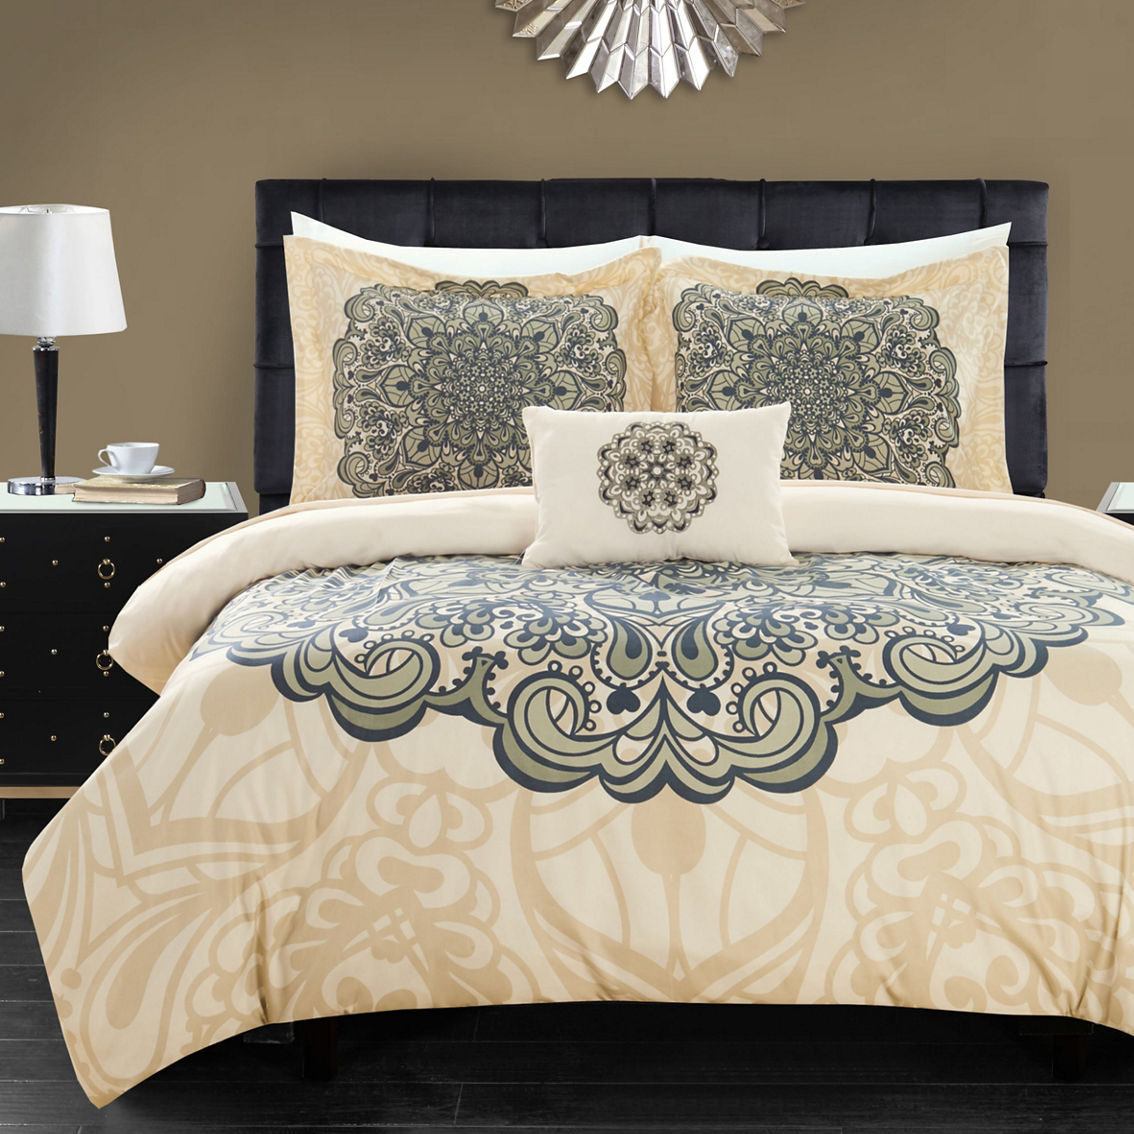 Chic Home Palmer 8pc Comforter Set - Image 2 of 5